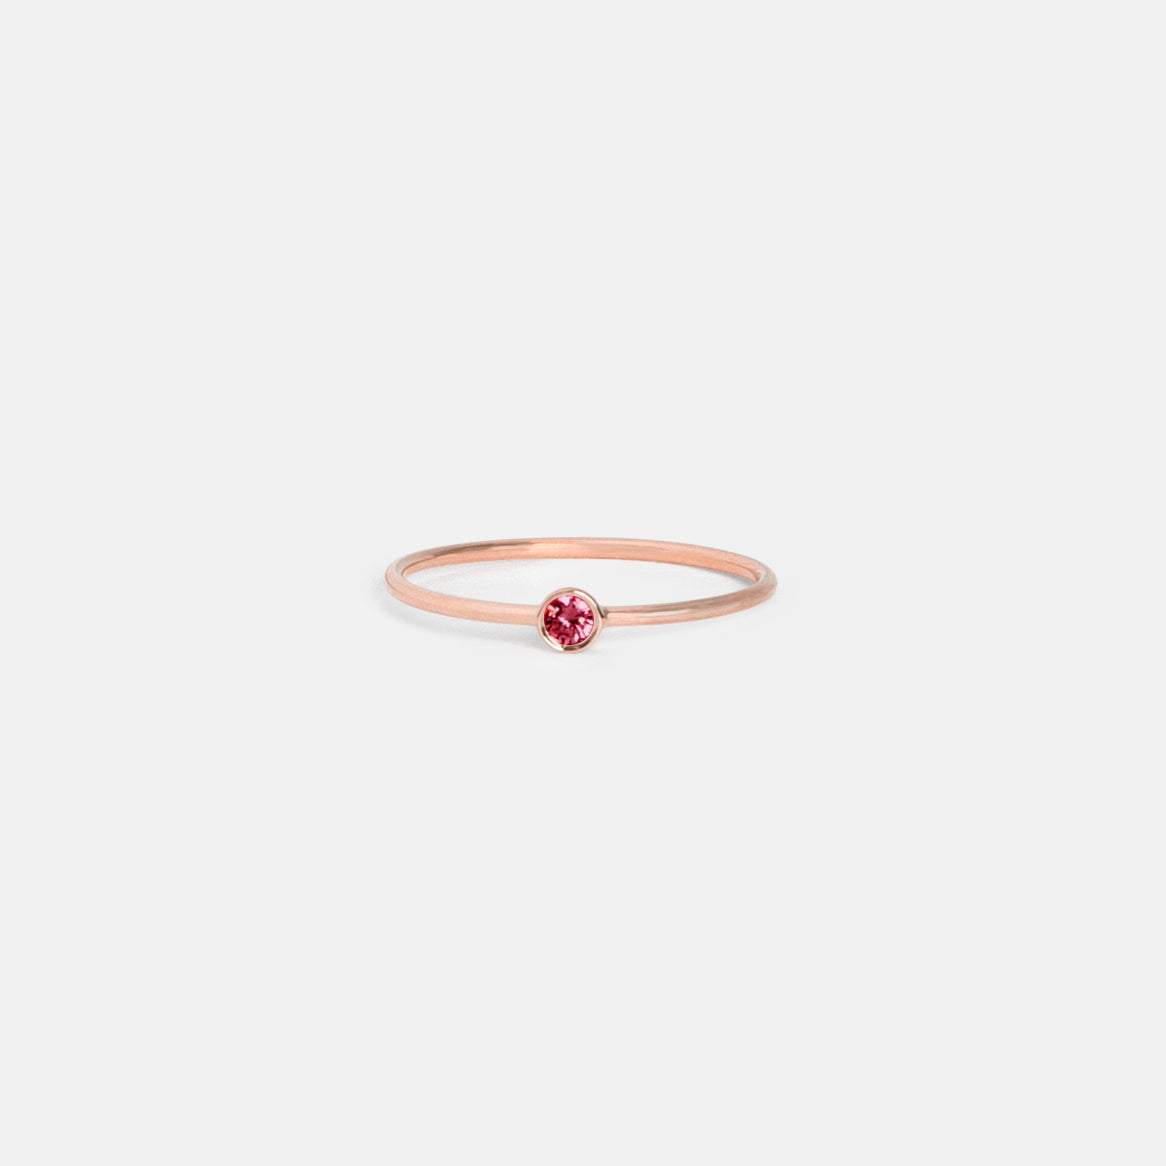 Simple Large Kaya Ring in 14k Rose Gold set with Ruby by SHW Fine Jewelry in NYC